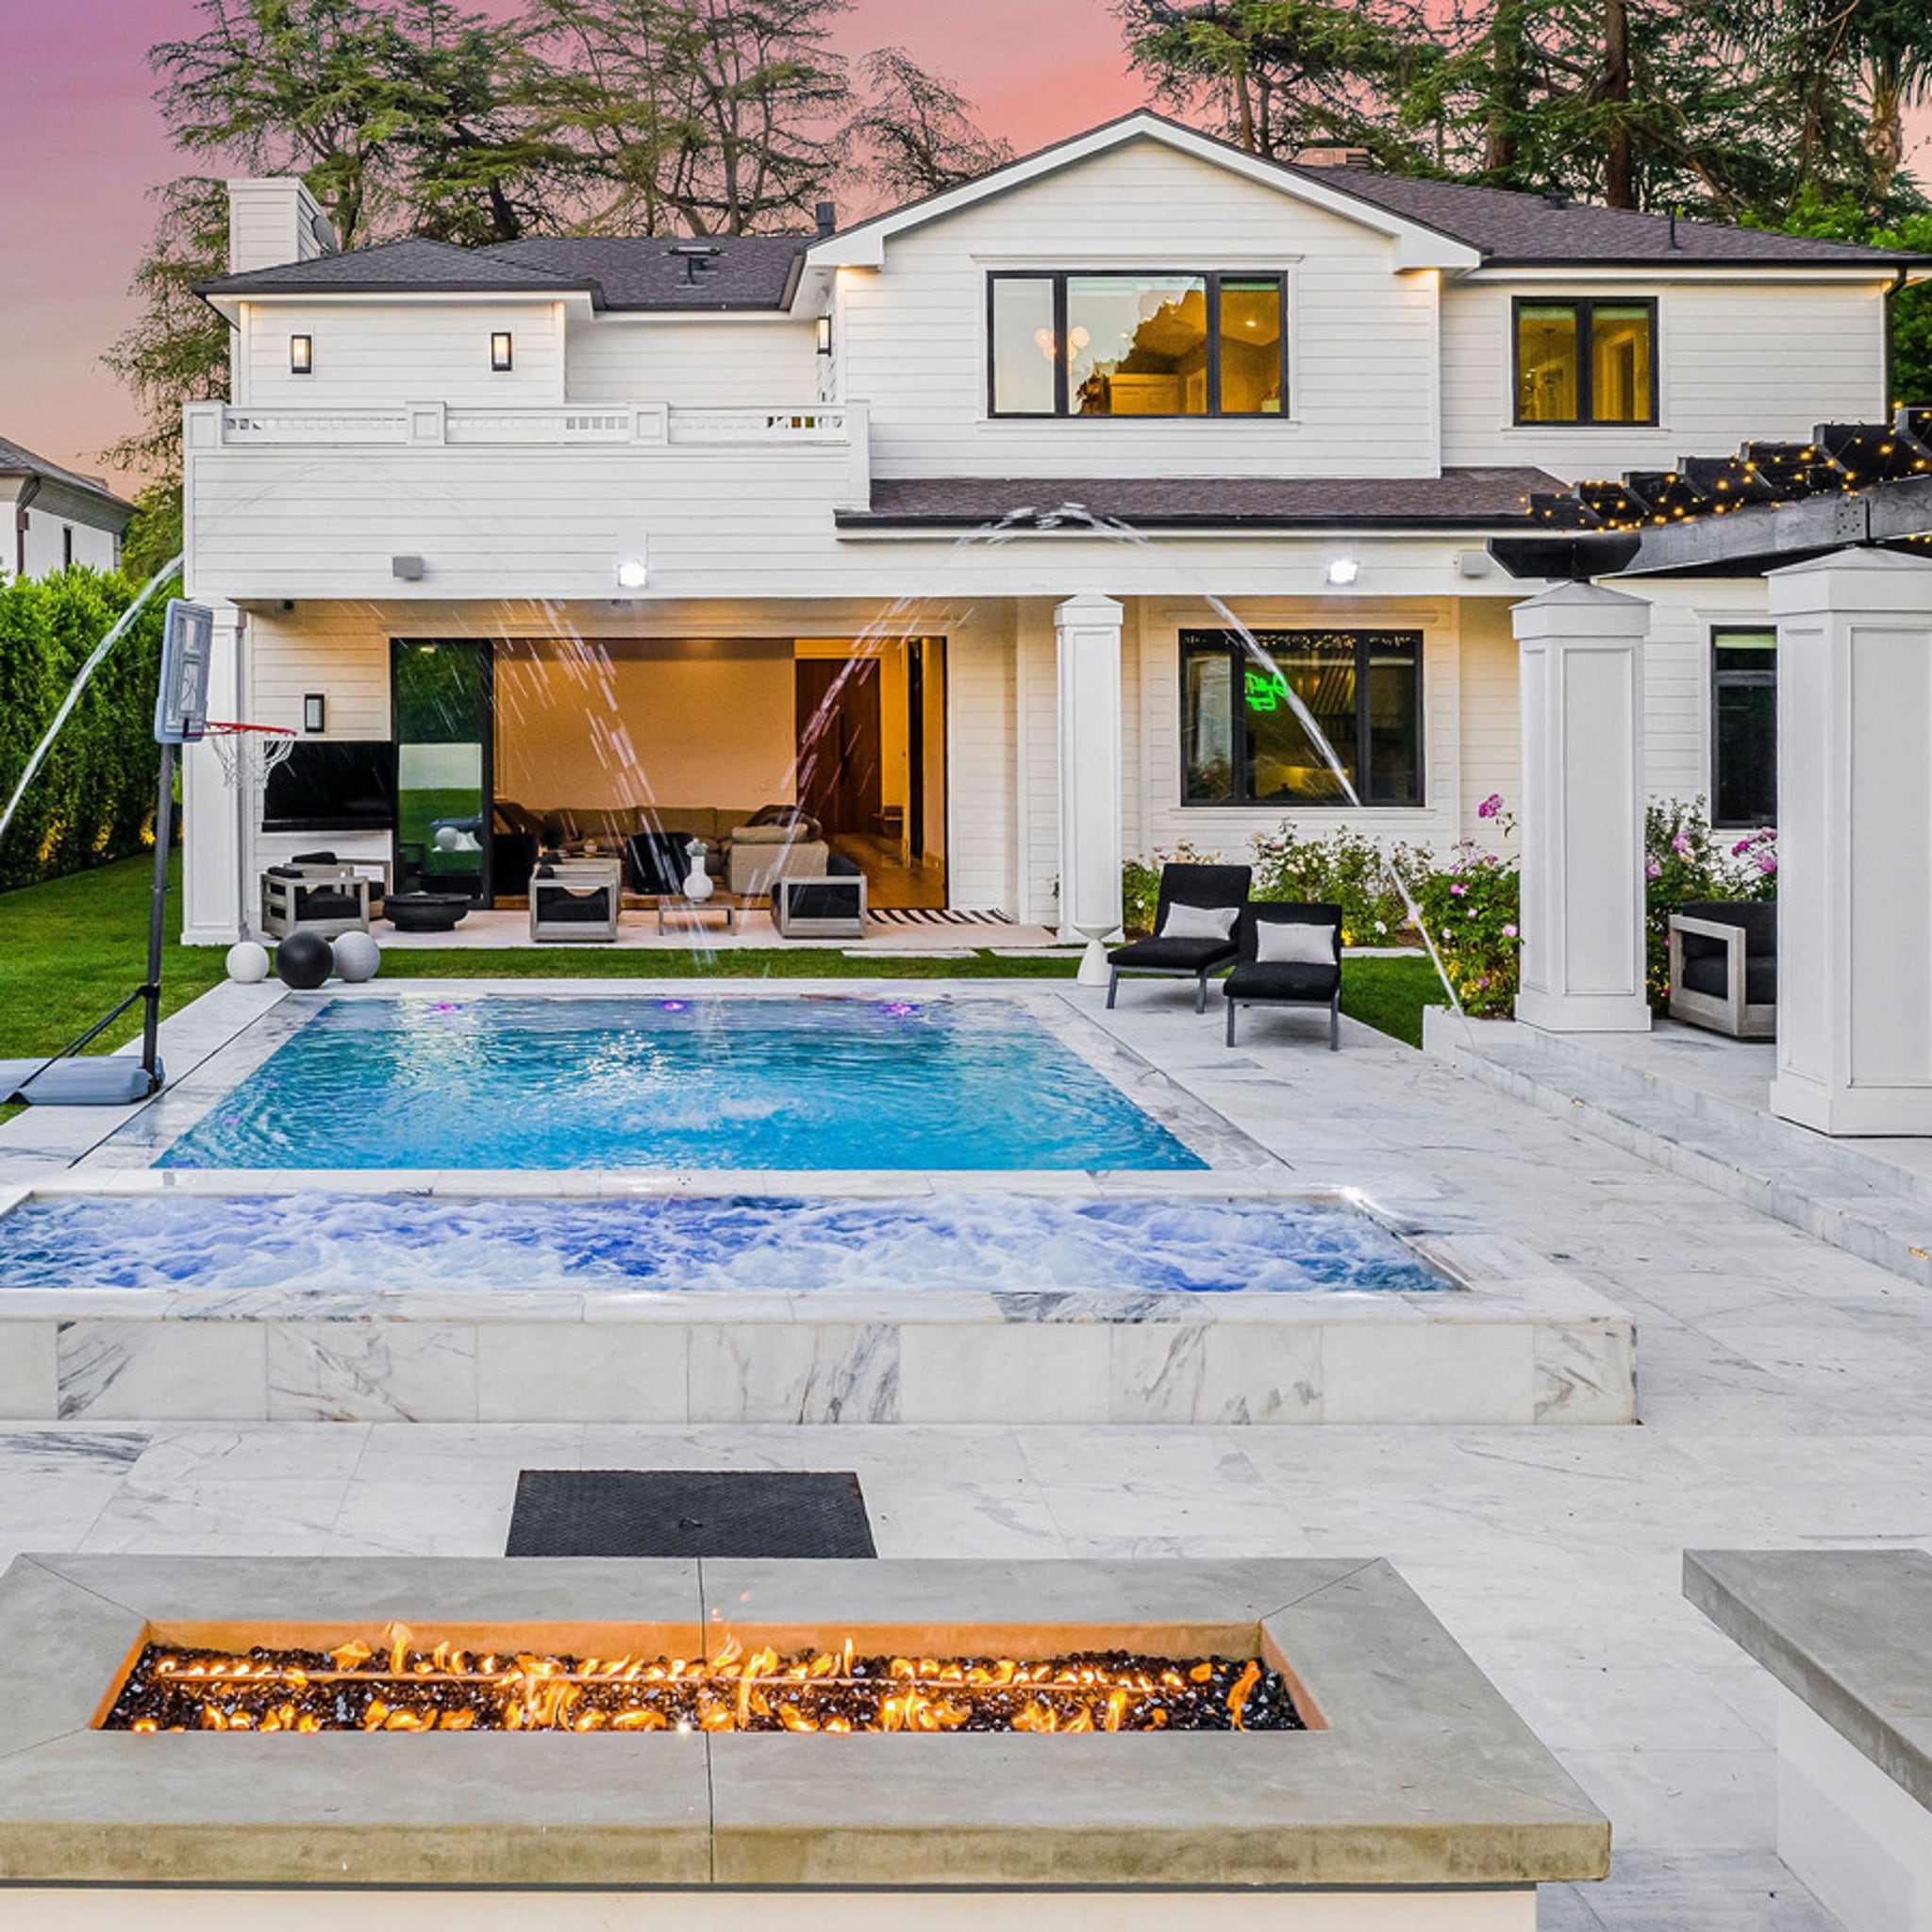 Tristan Thompson Lists Encino Mansion for $8.5M, Year After Khloe Drama